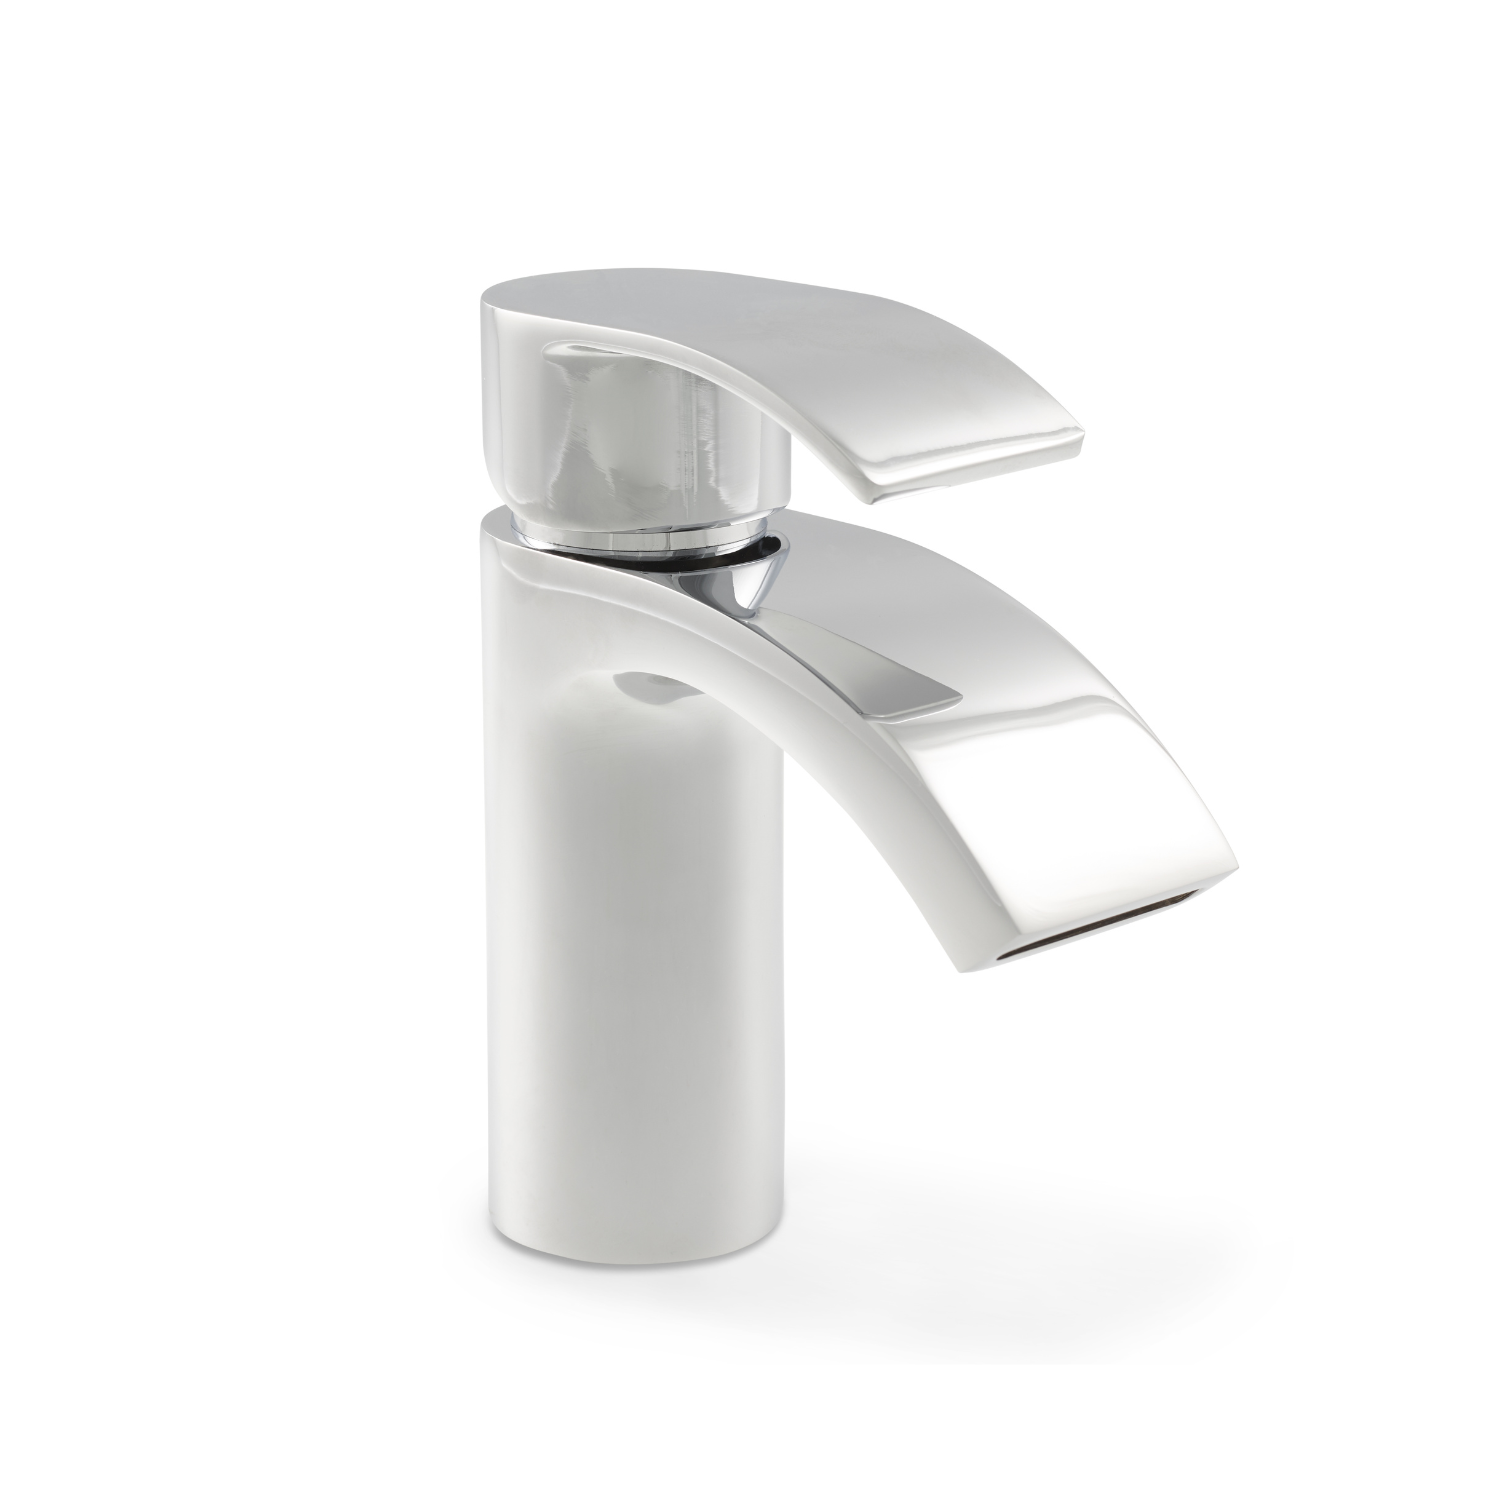 Upgrade Your Bathroom with Stylish Status Basin Tap, Toilet and Basin | Bath Tap, Shower Hose